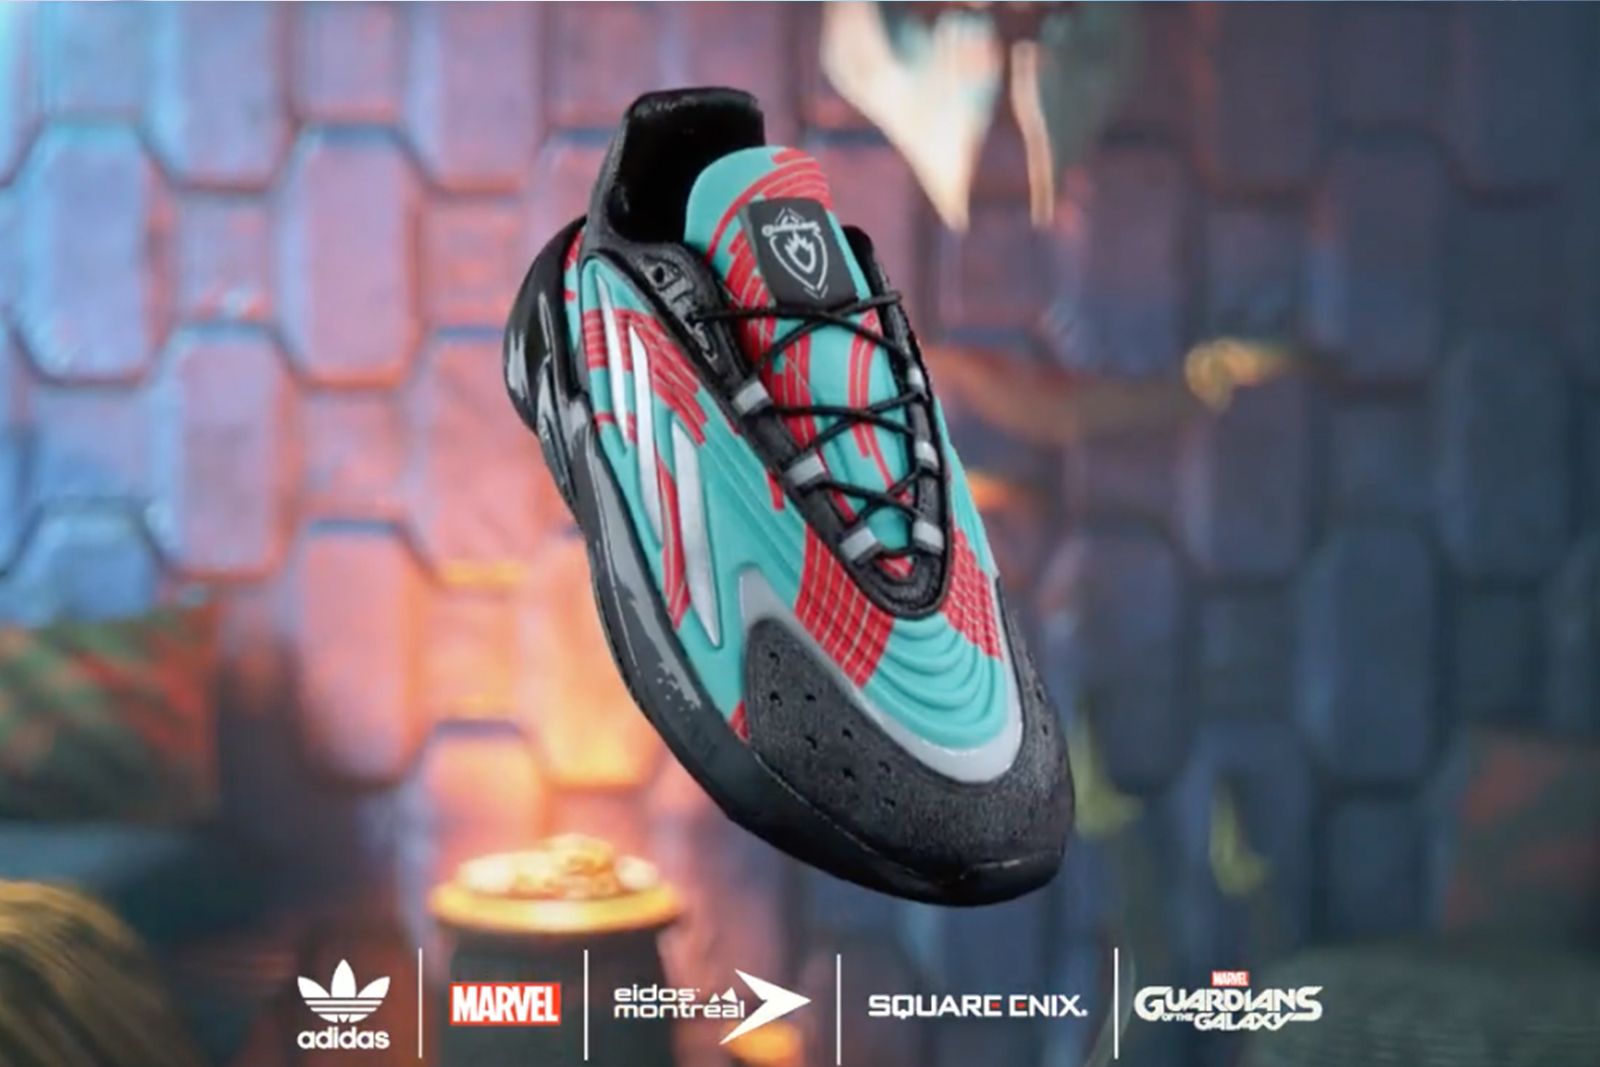 mode Imperialisme Dader Adidas Guardians of the Galaxy sneaker collection unveiled